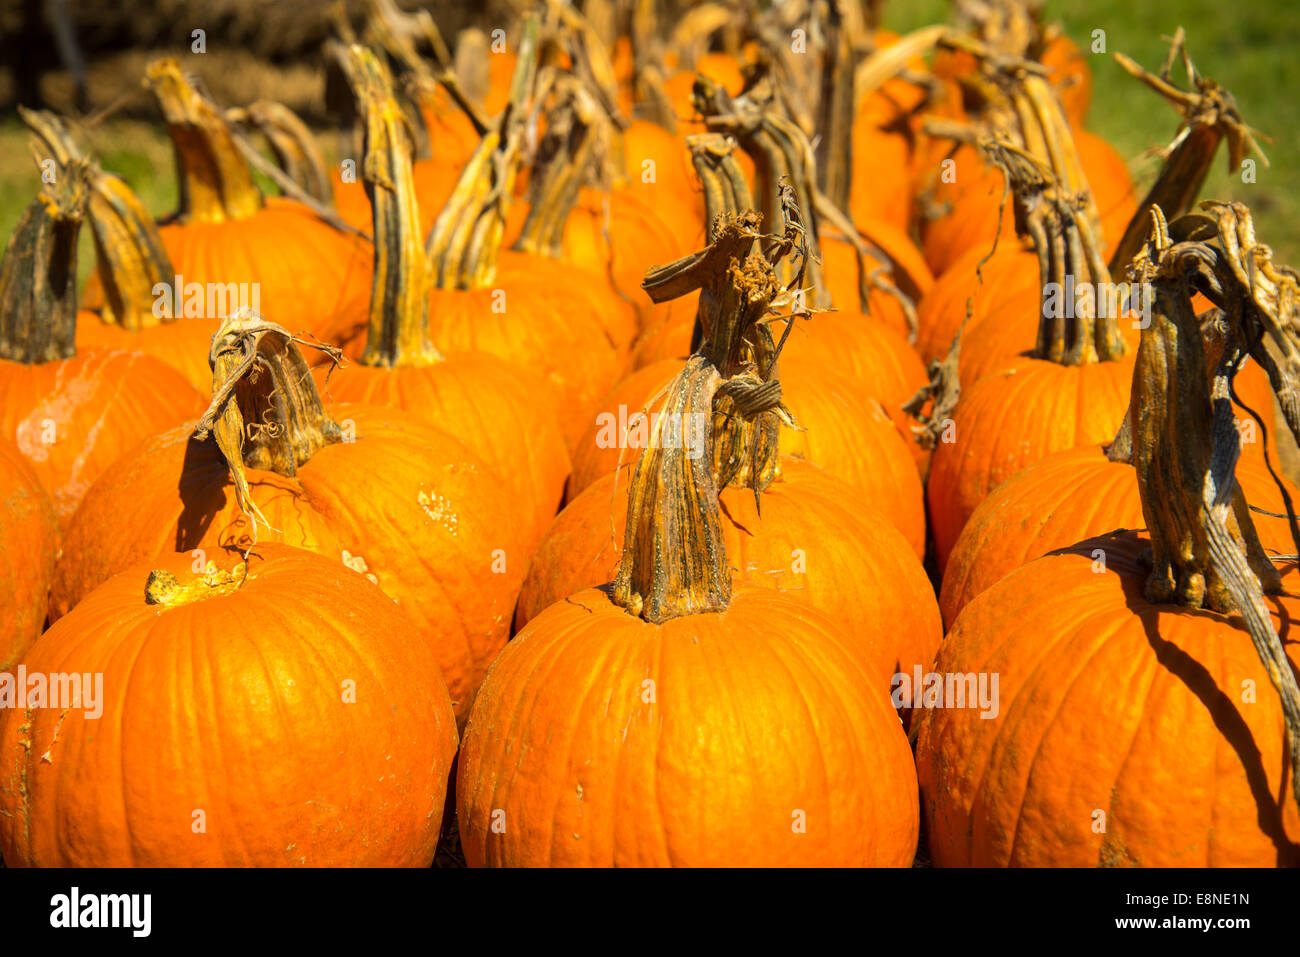 pumpkins and gourds fresh picked from the patch Stock Photo